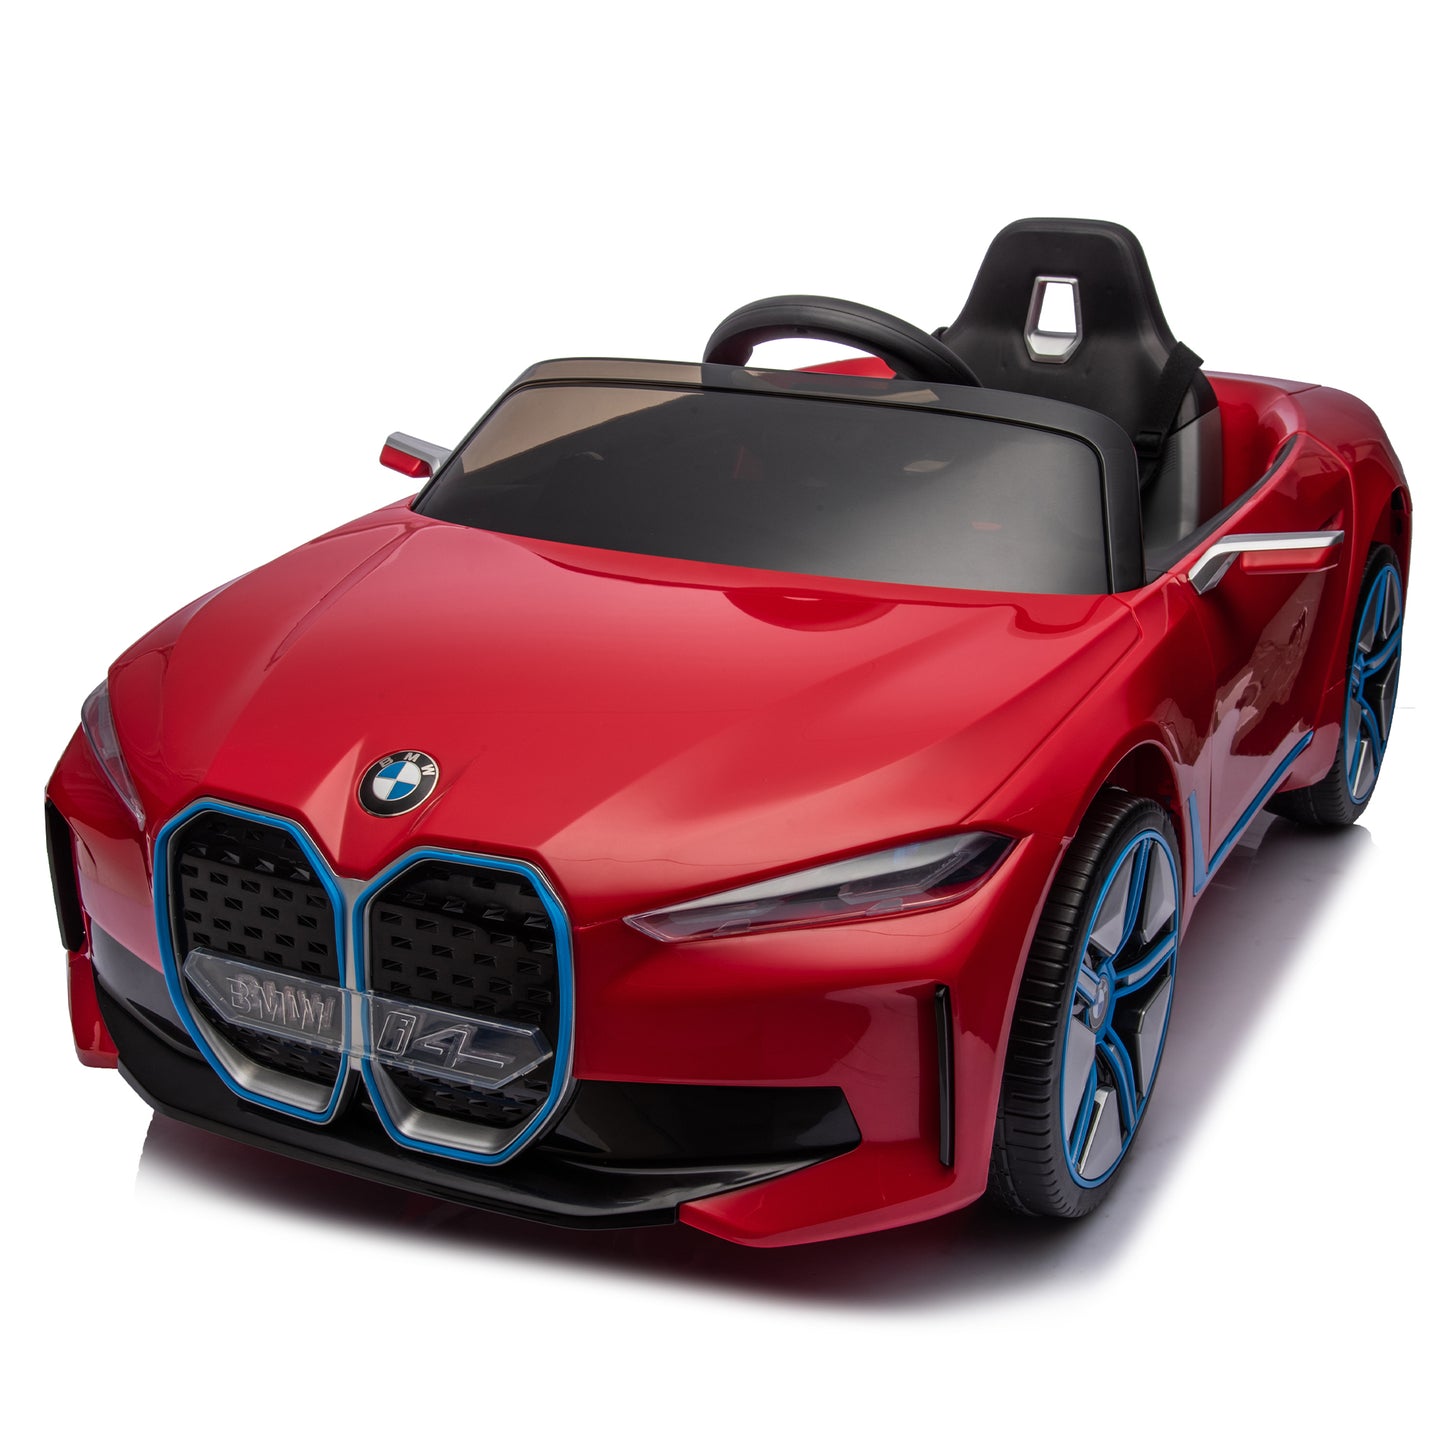 Licensed BMW I4,12v Kids ride on car 2.4G W/Parents Remote Control,electric car for kids,Three speed adjustable,Power display, USB,MP3 ,Bluetooth,LED light,Two-point safety belt,story